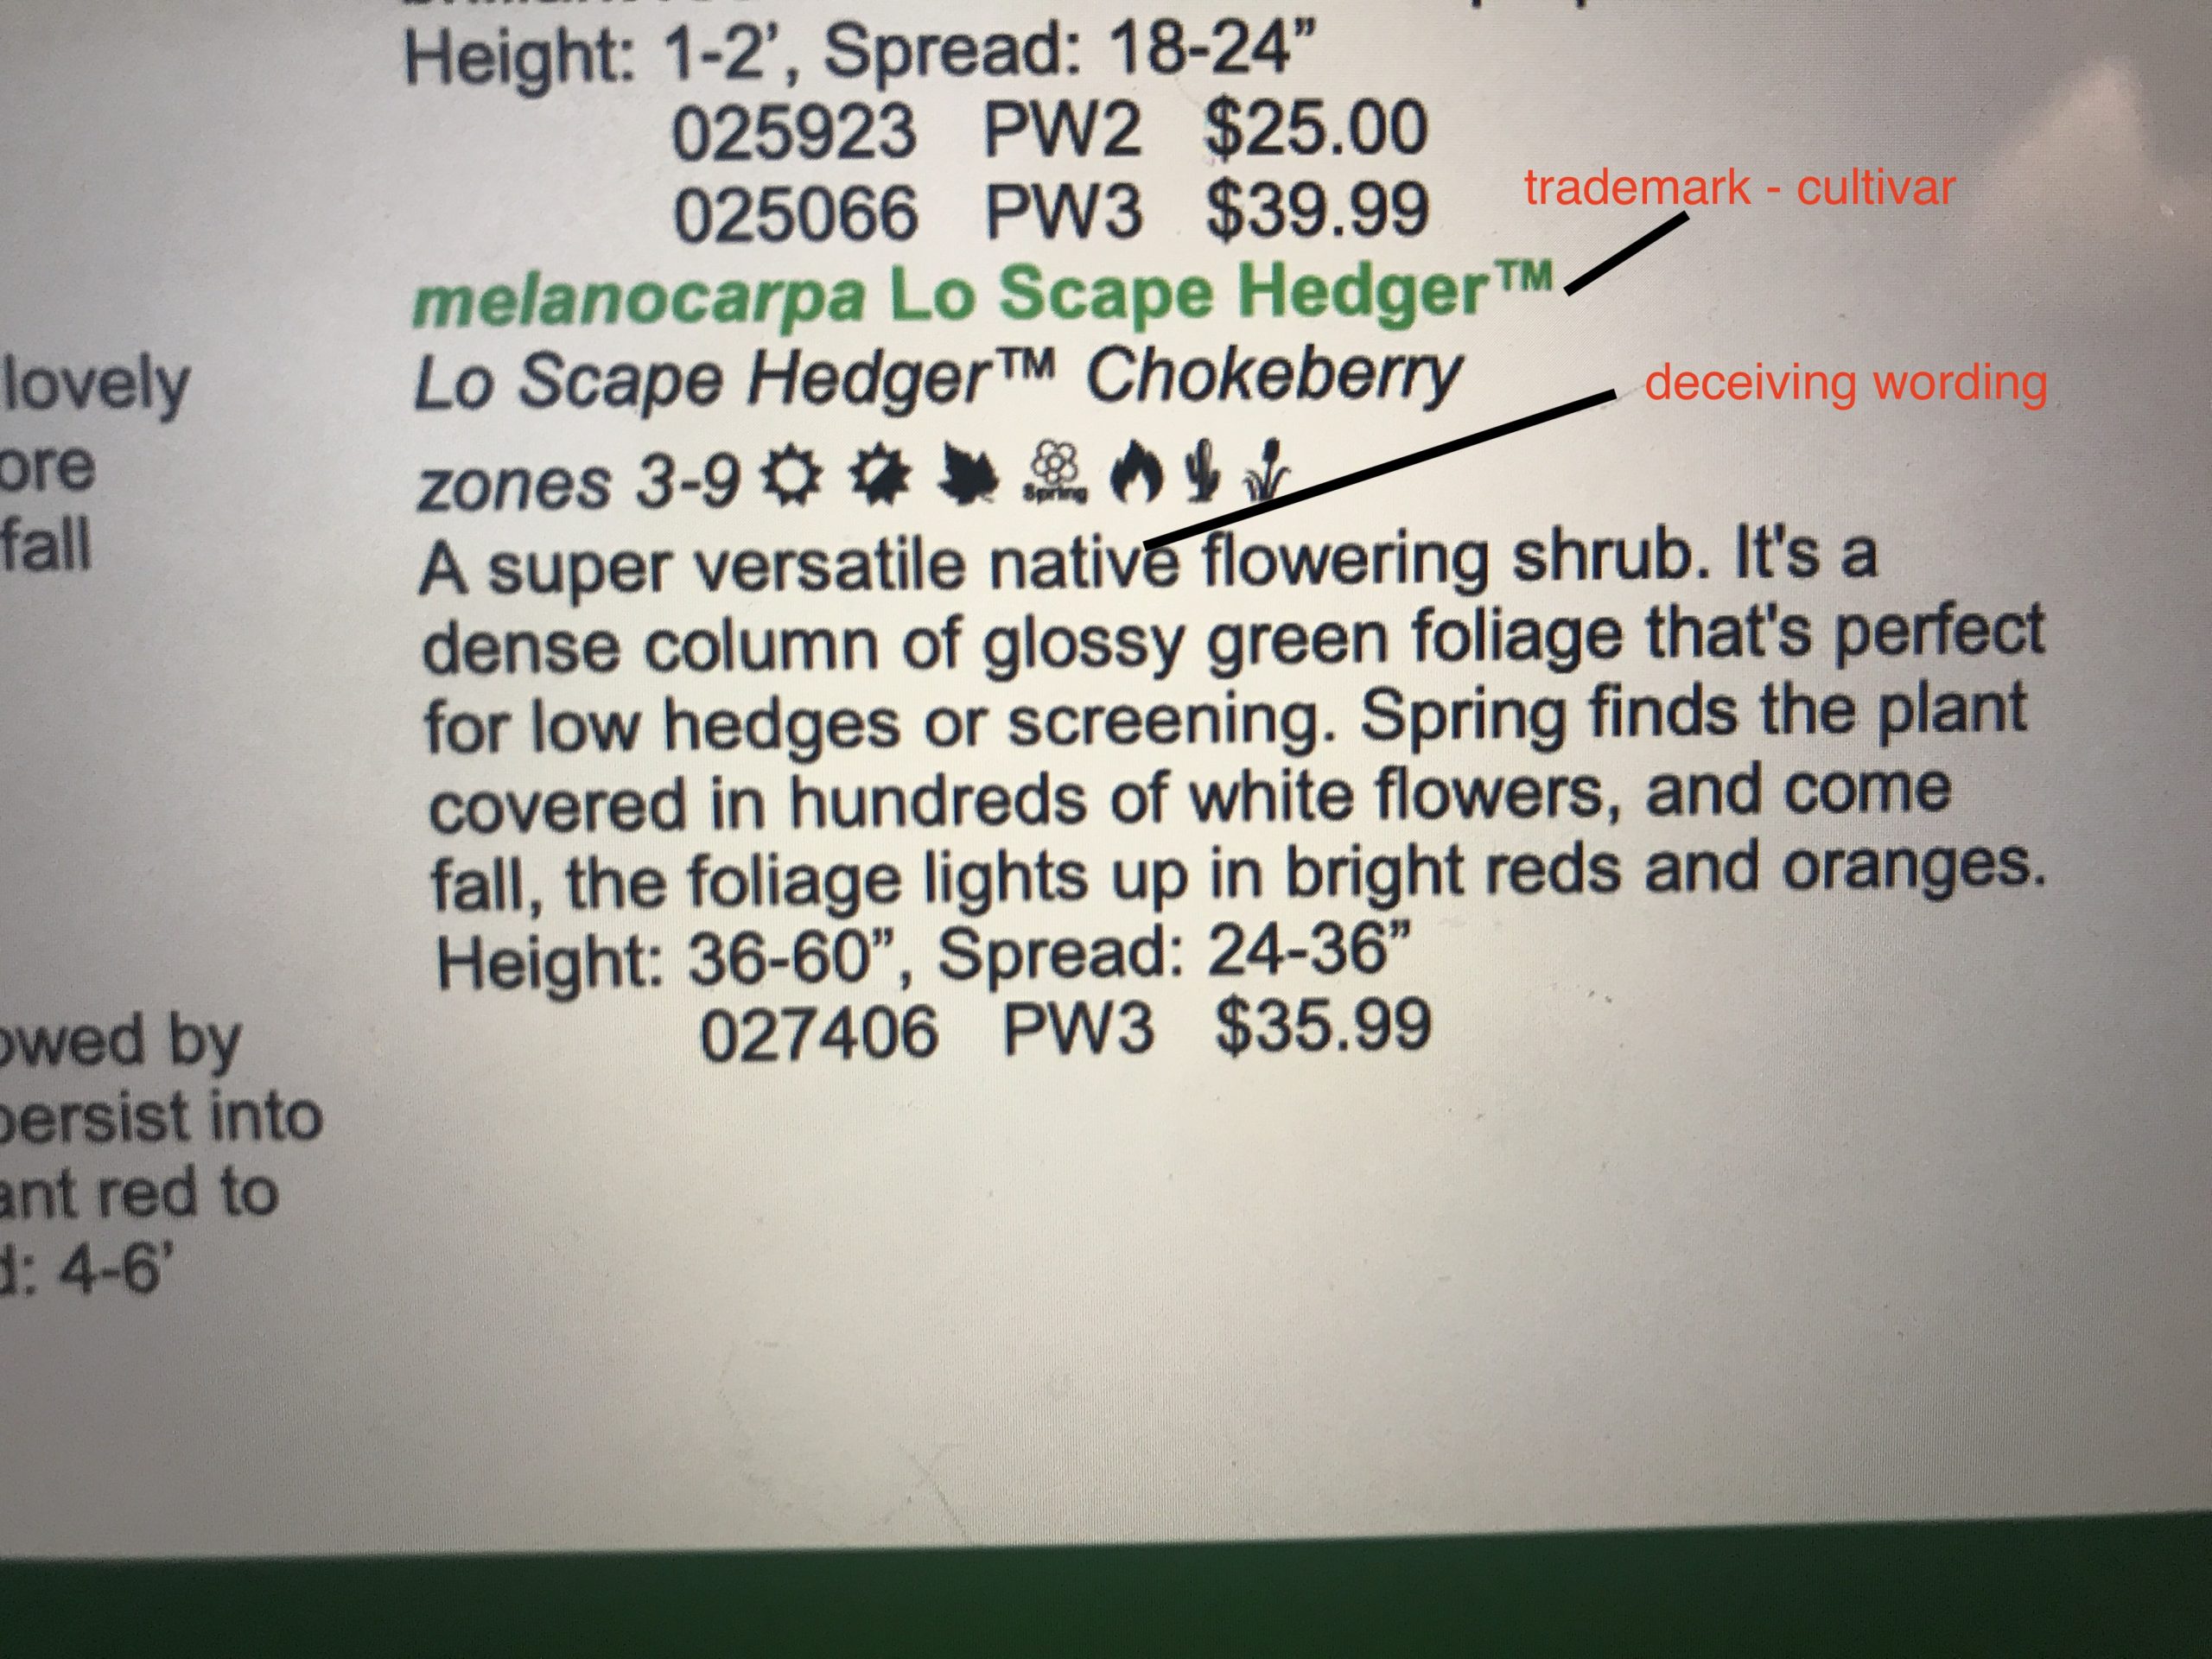 Plant marketed as native when it's a cultivar